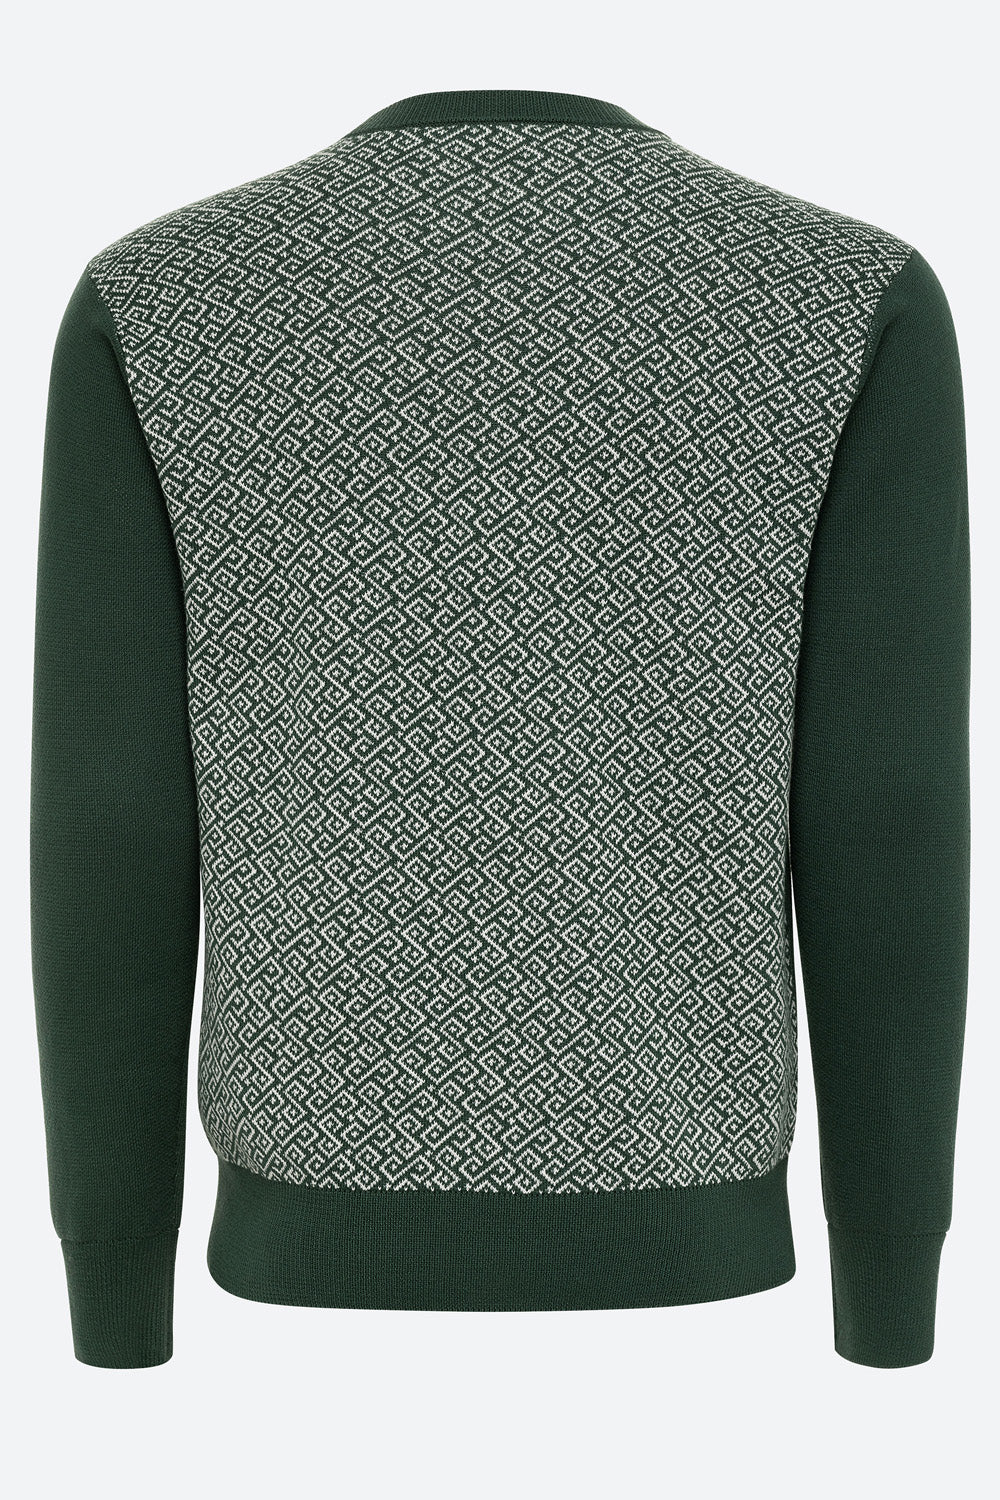 Ivo Cotton Knit Logo Back Sweater in Green and Off-White